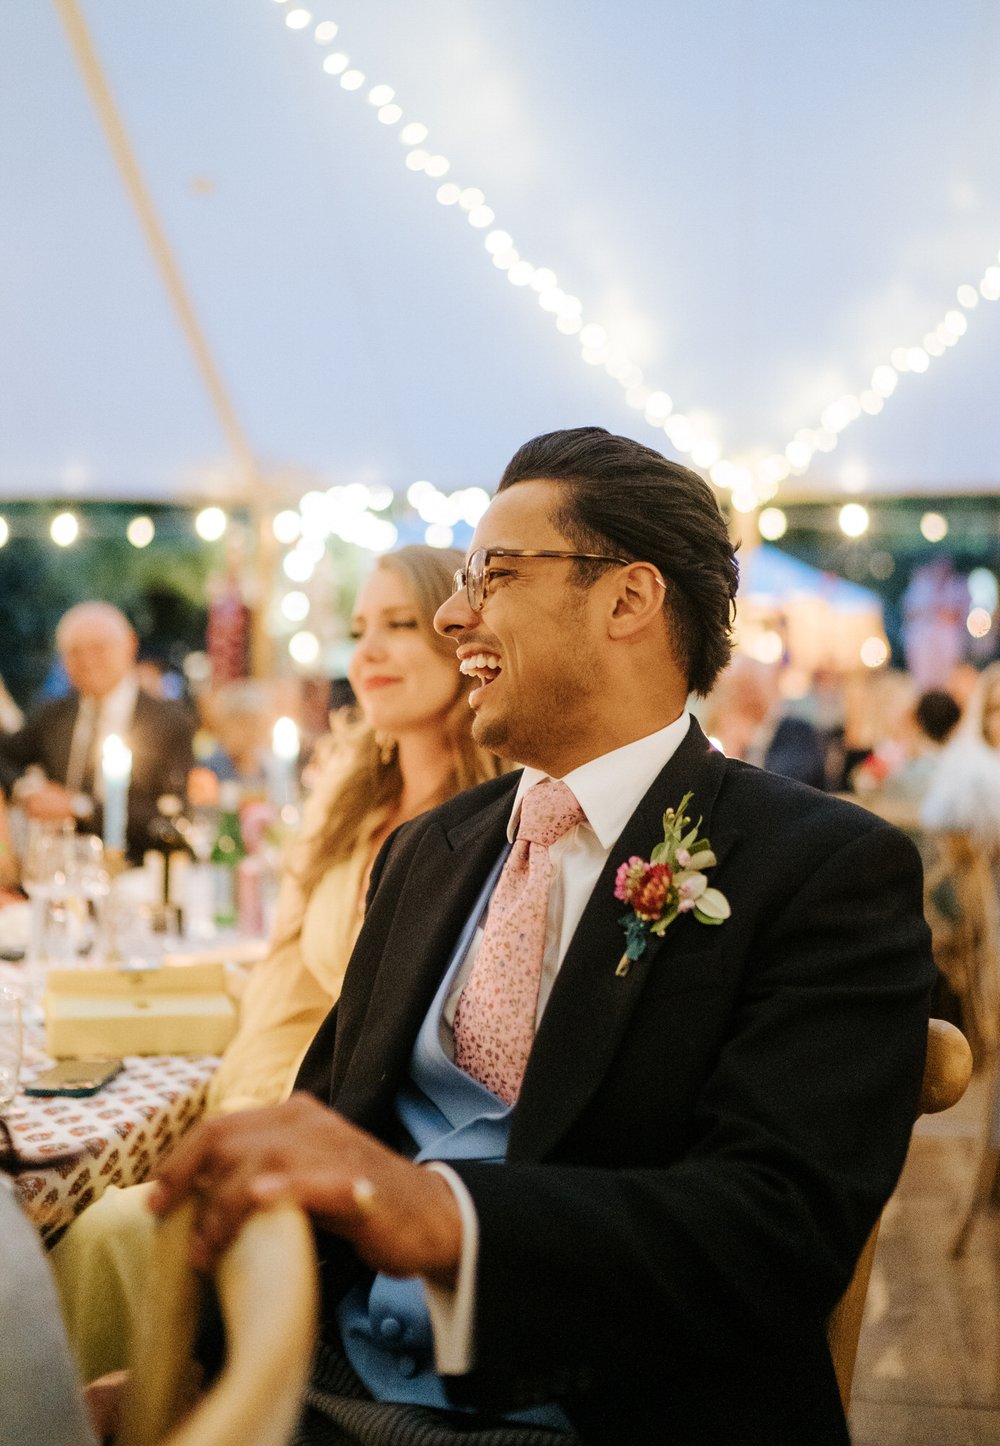 Bride's brother smiles radiantly during wedding speeches taking place inside atmospherically-lit marquee at British garden marquee wedding